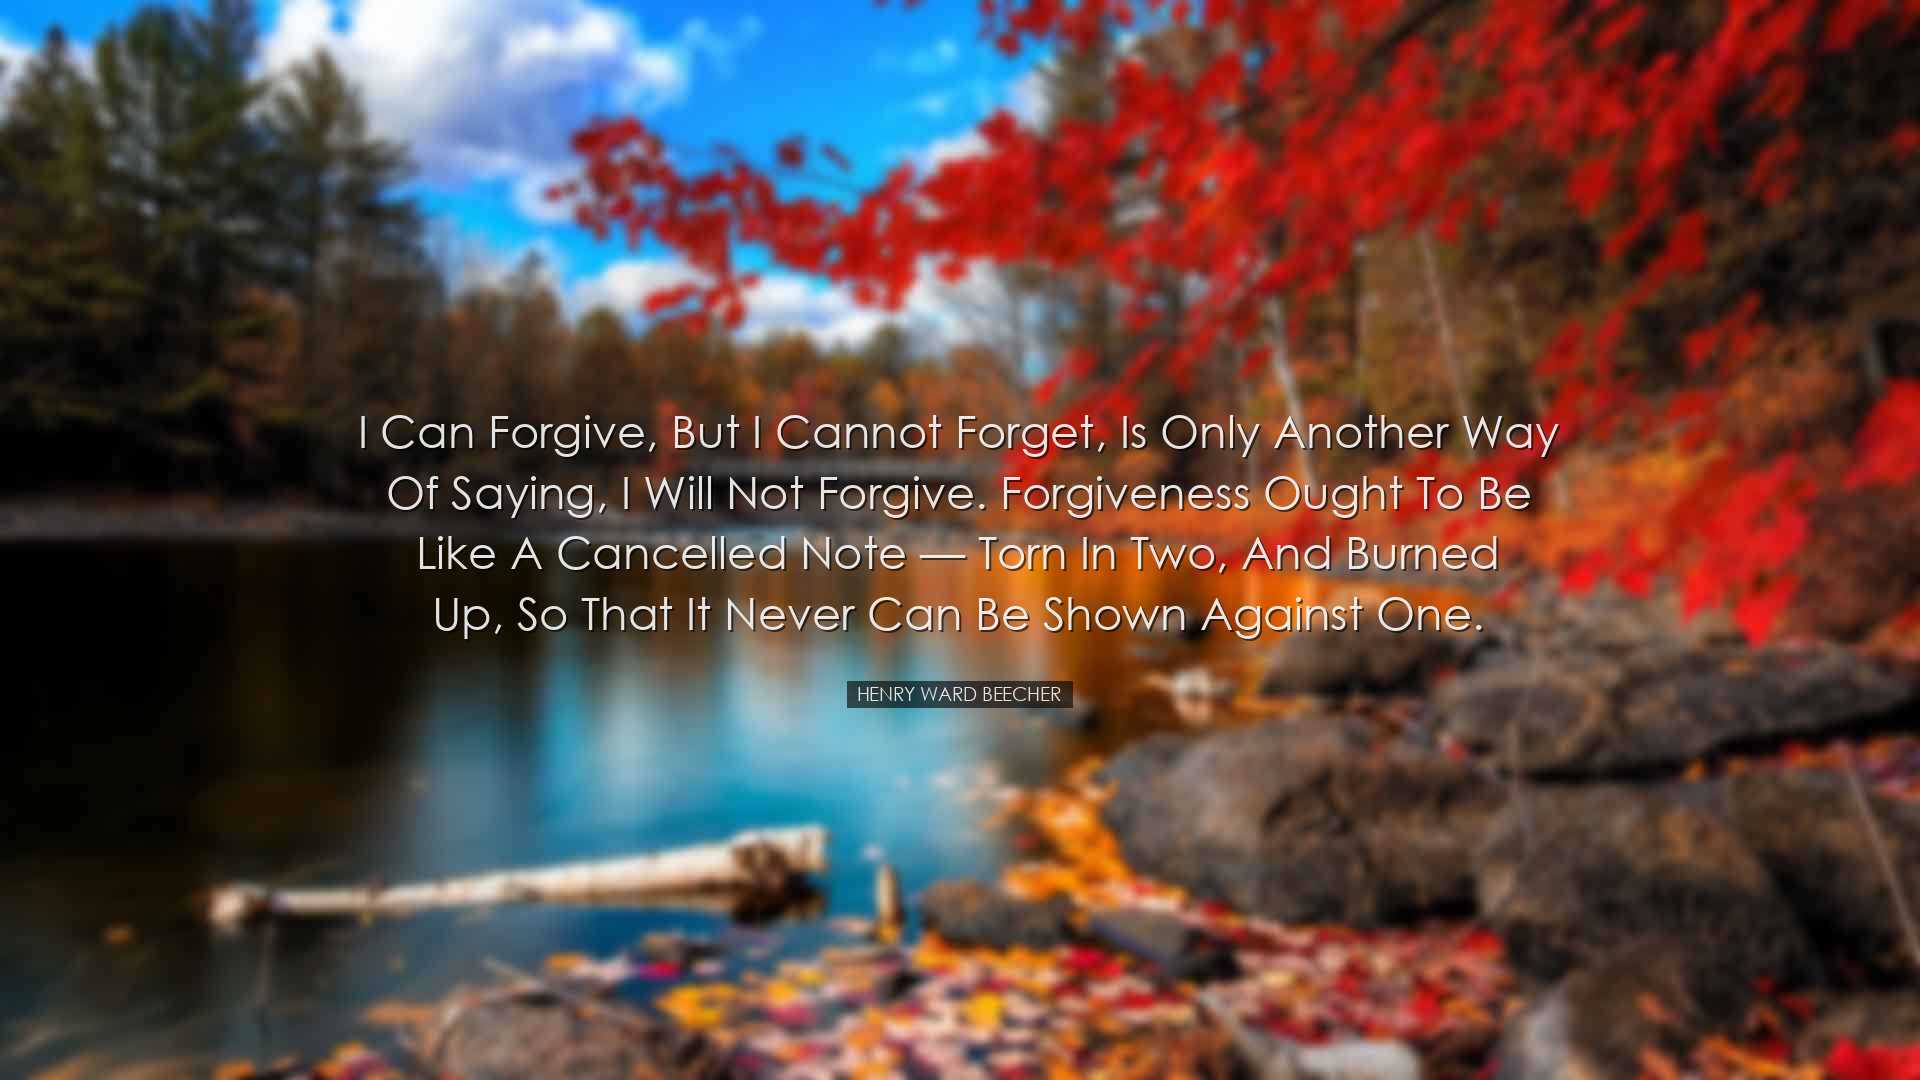 I can forgive, but I cannot forget, is only another way of saying,